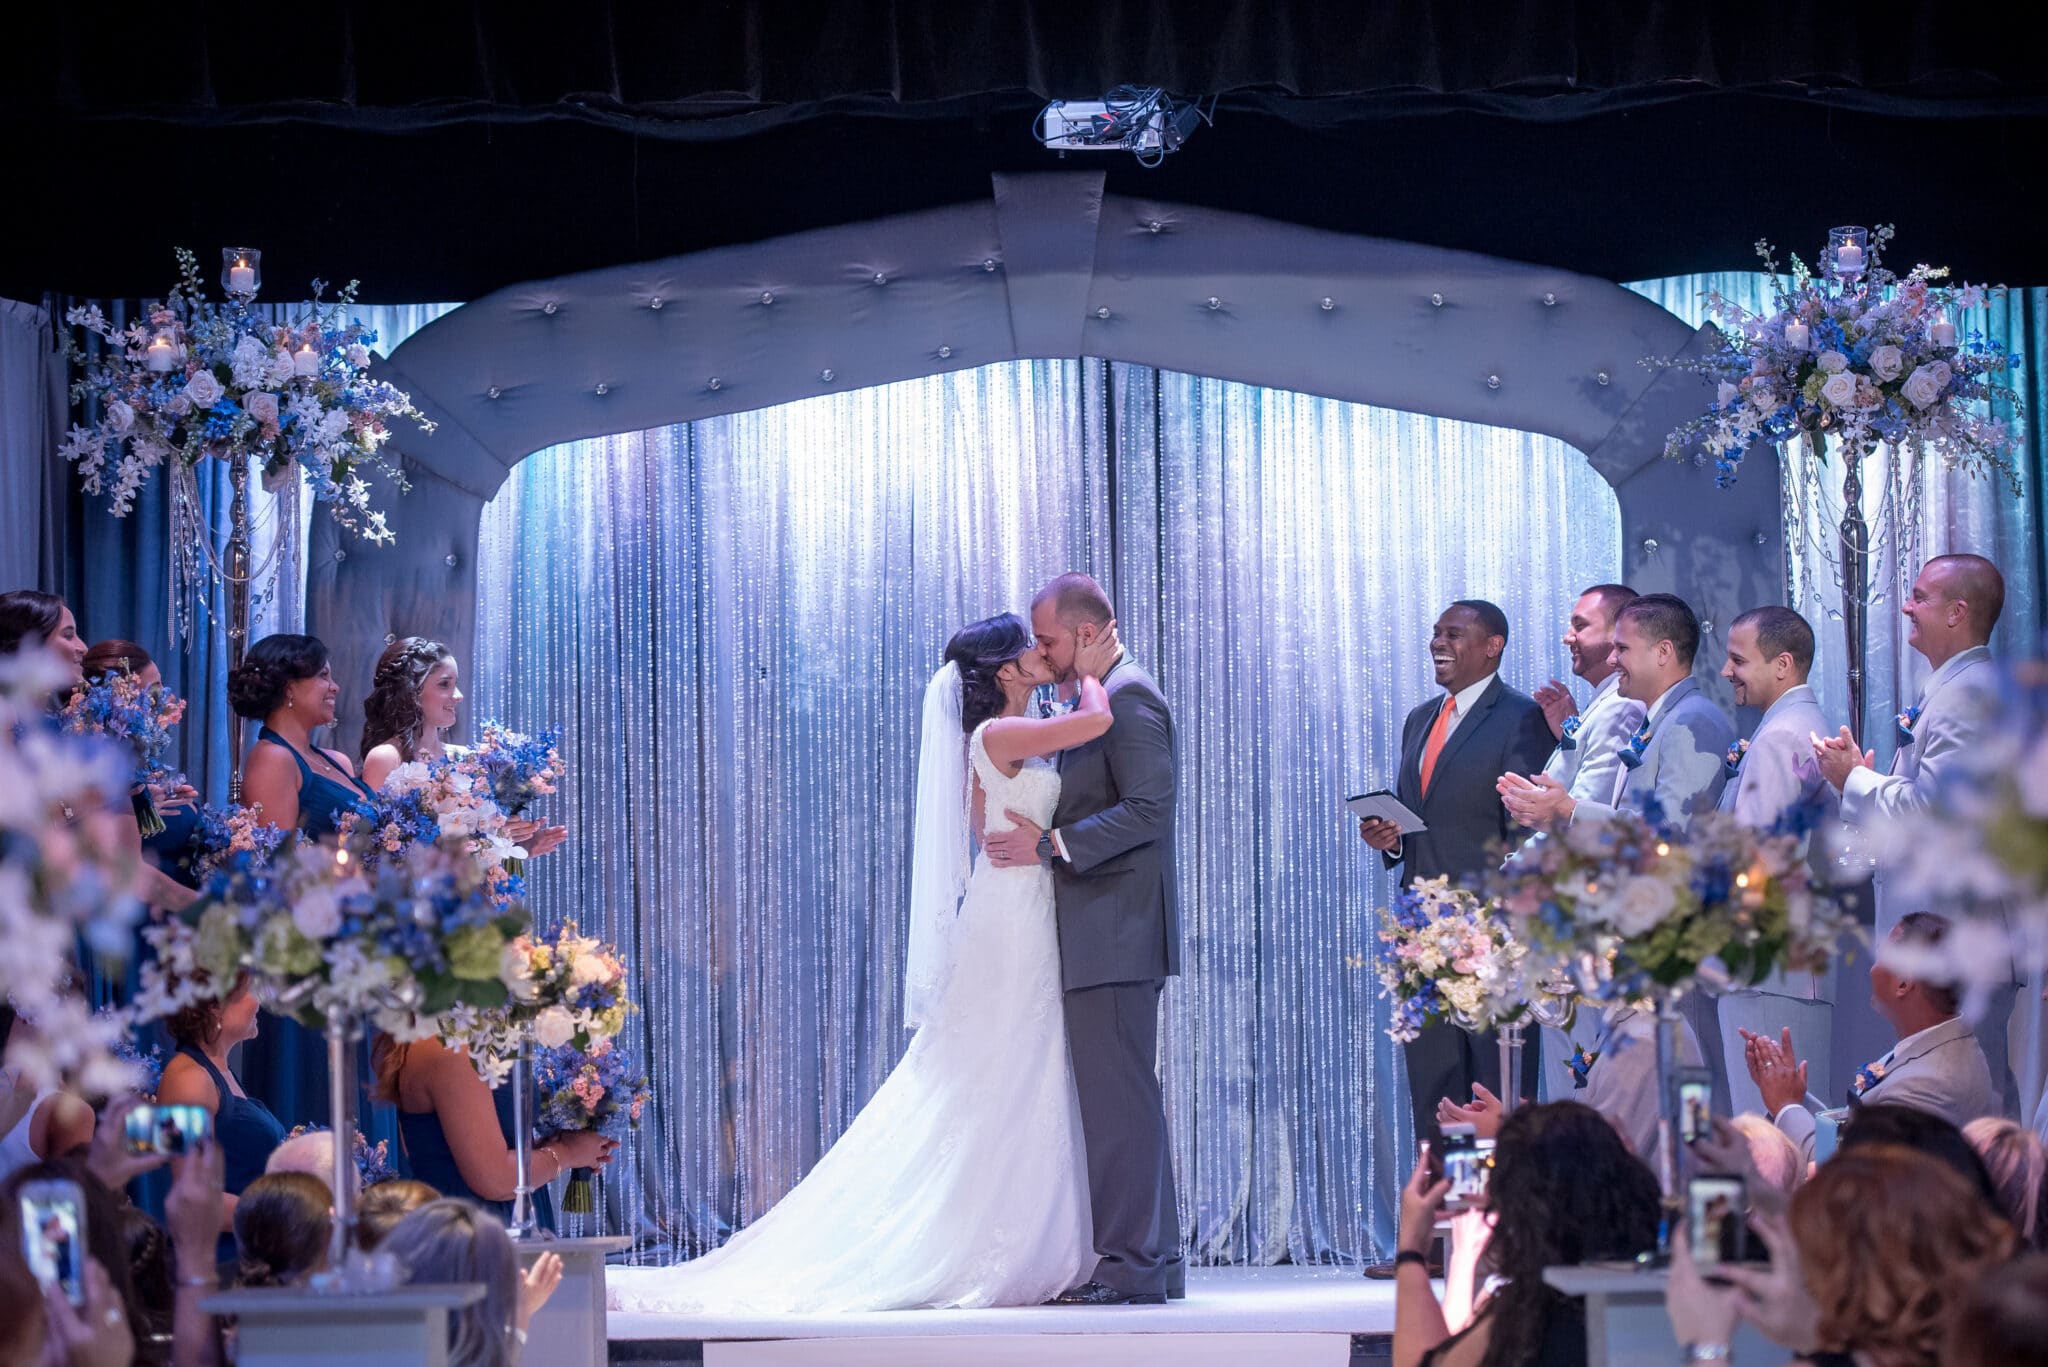 Anna Christine Events, bride & groom kissing in front of curtain at ceremony